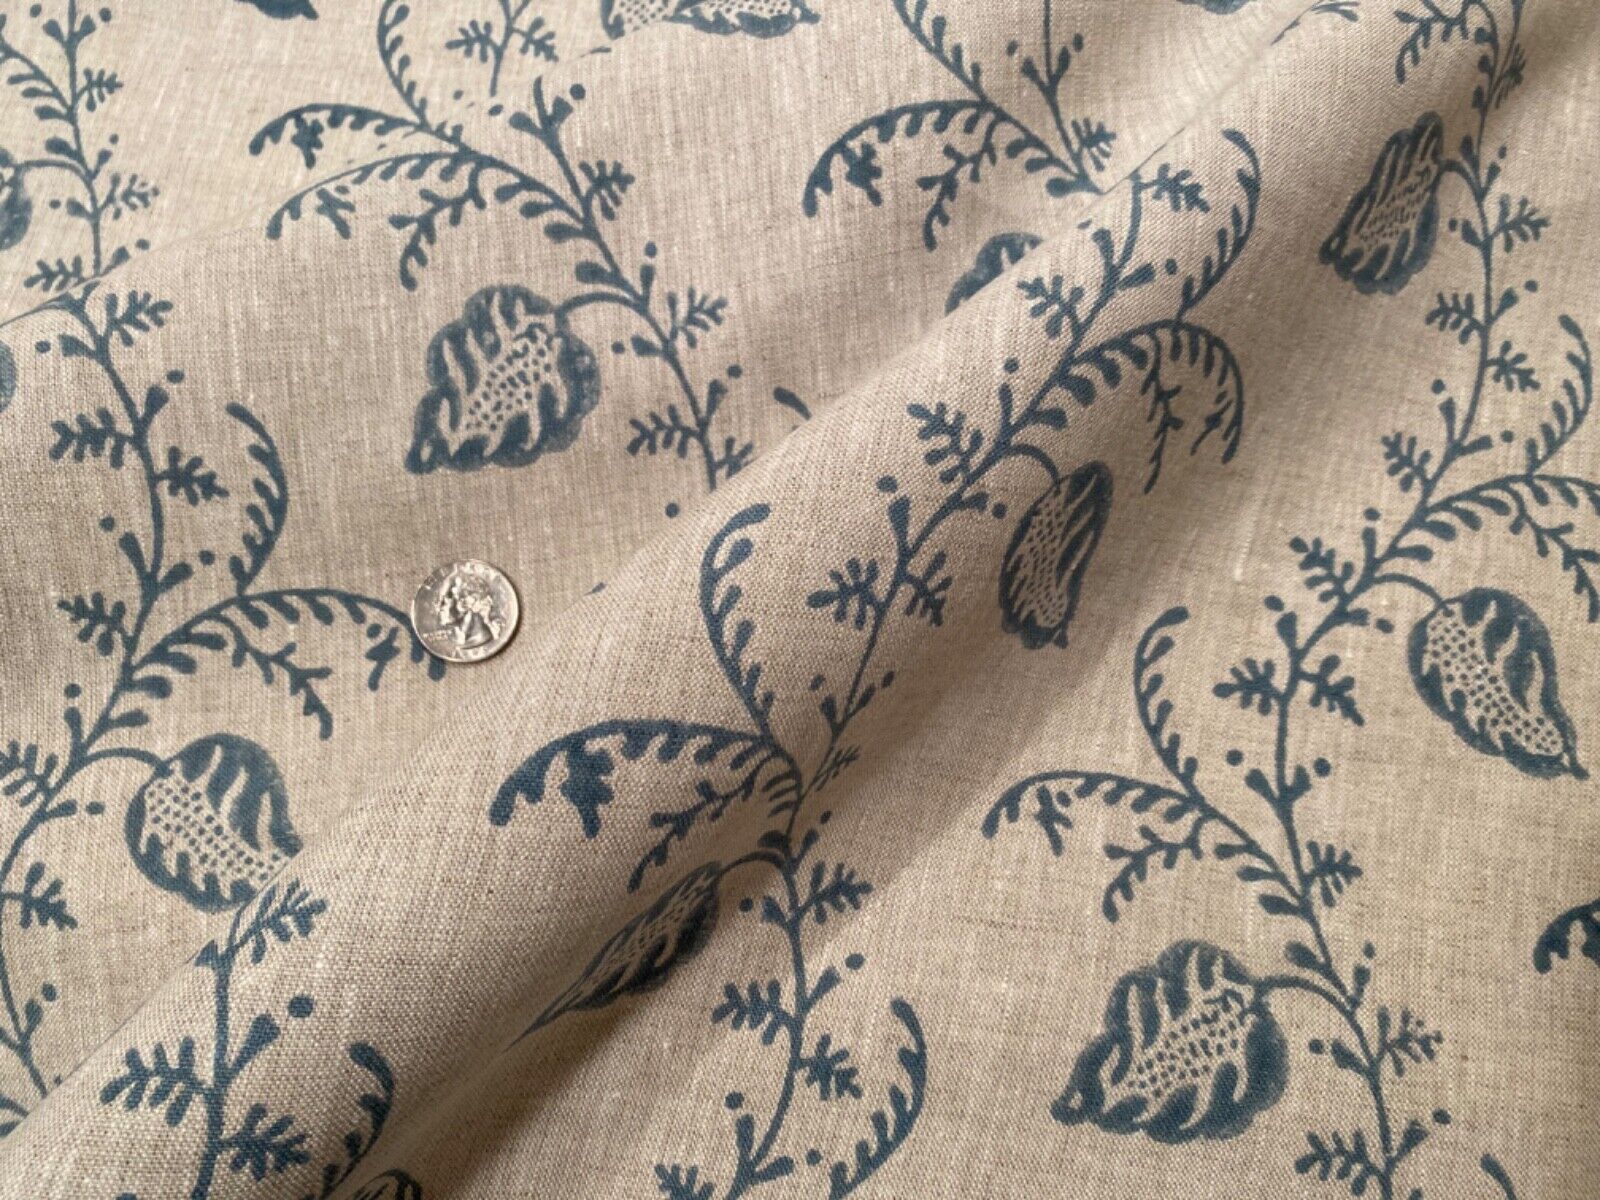 4YD COLEFAX & FOWLER Felicity Old Blue Hand Block Print Linen Fabric $725 Retail